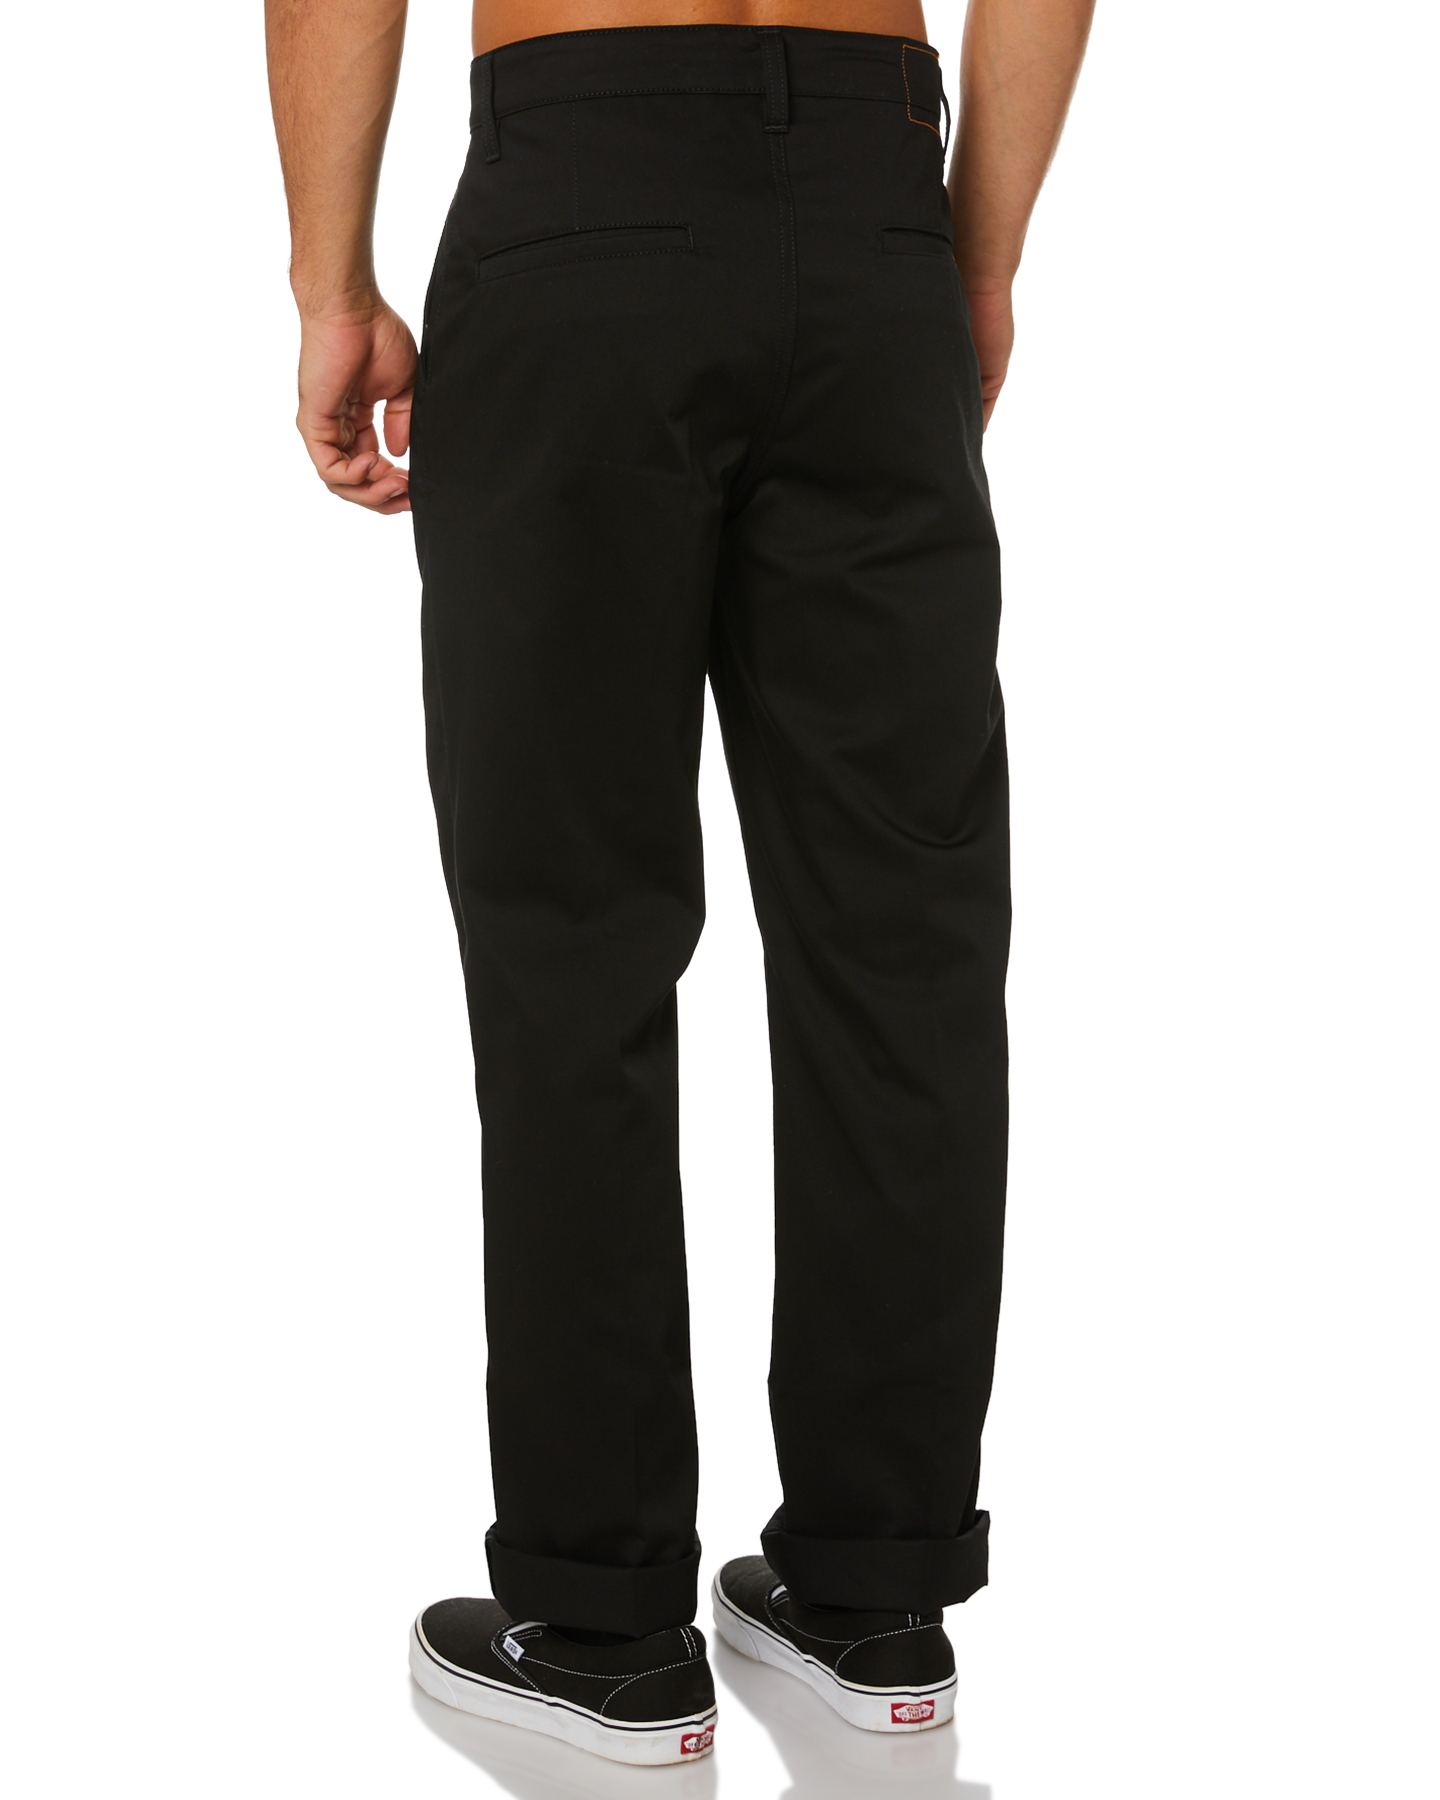 Nudie Jeans Co Lazy Leo Mens Chino Pant - Black | SurfStitch